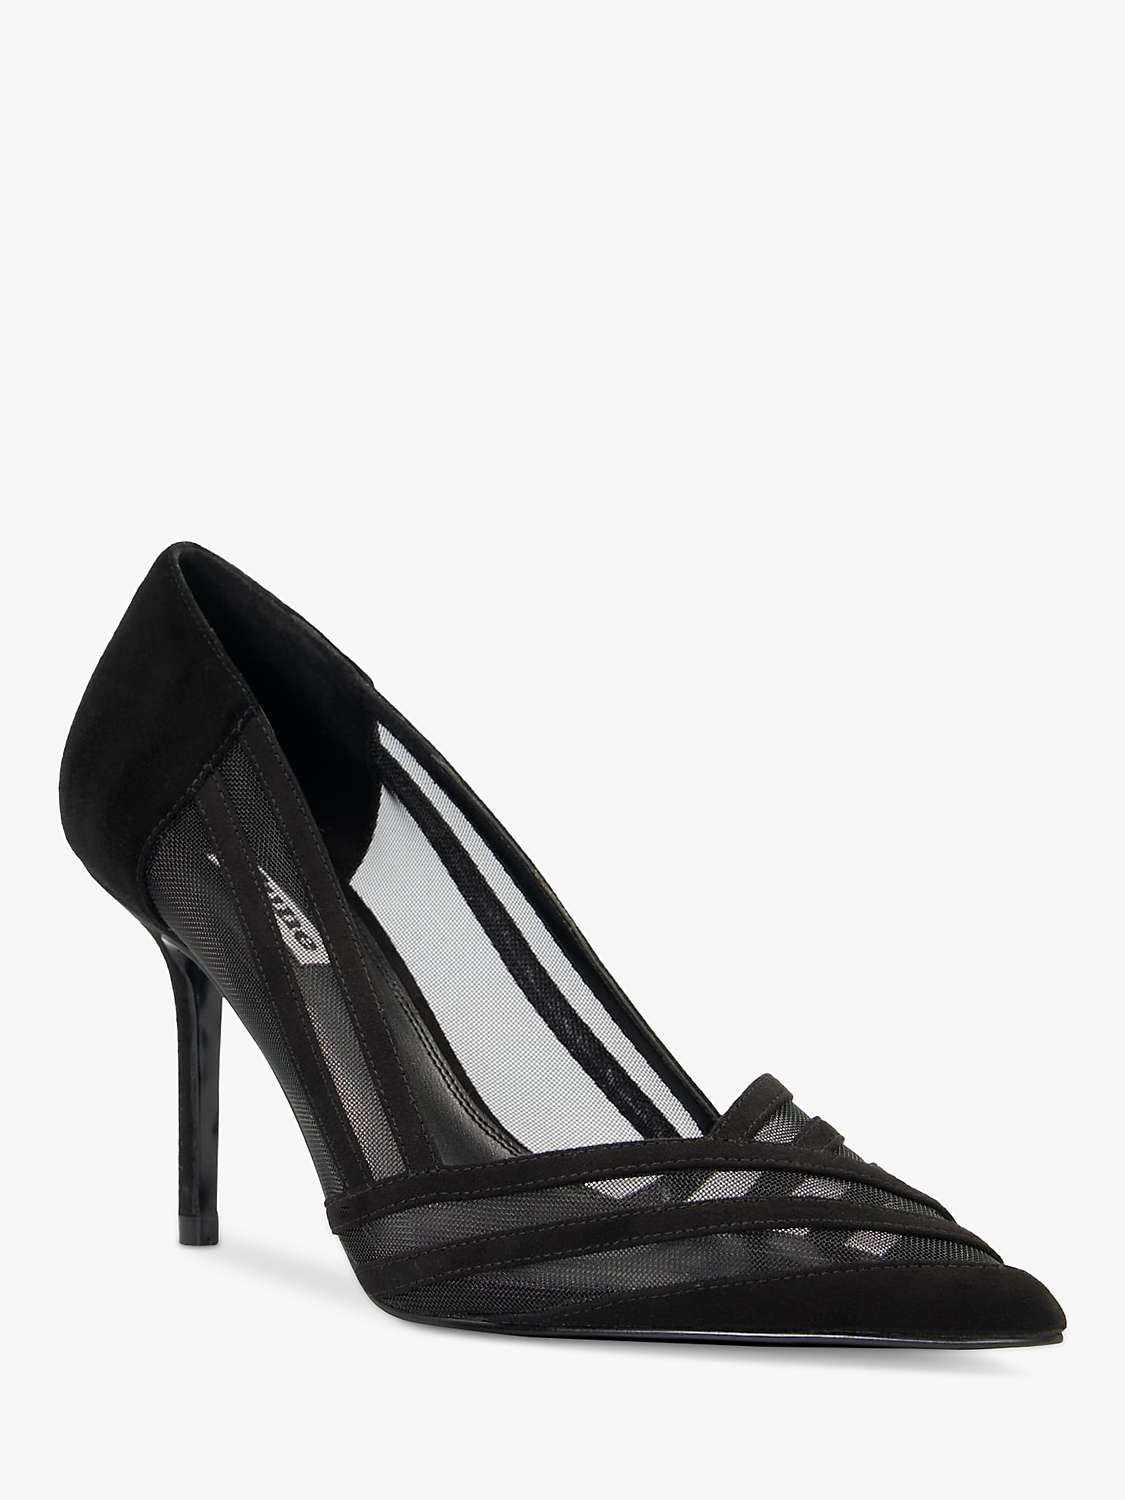 Buy Dune Axis Suede Court Shoes Online at johnlewis.com